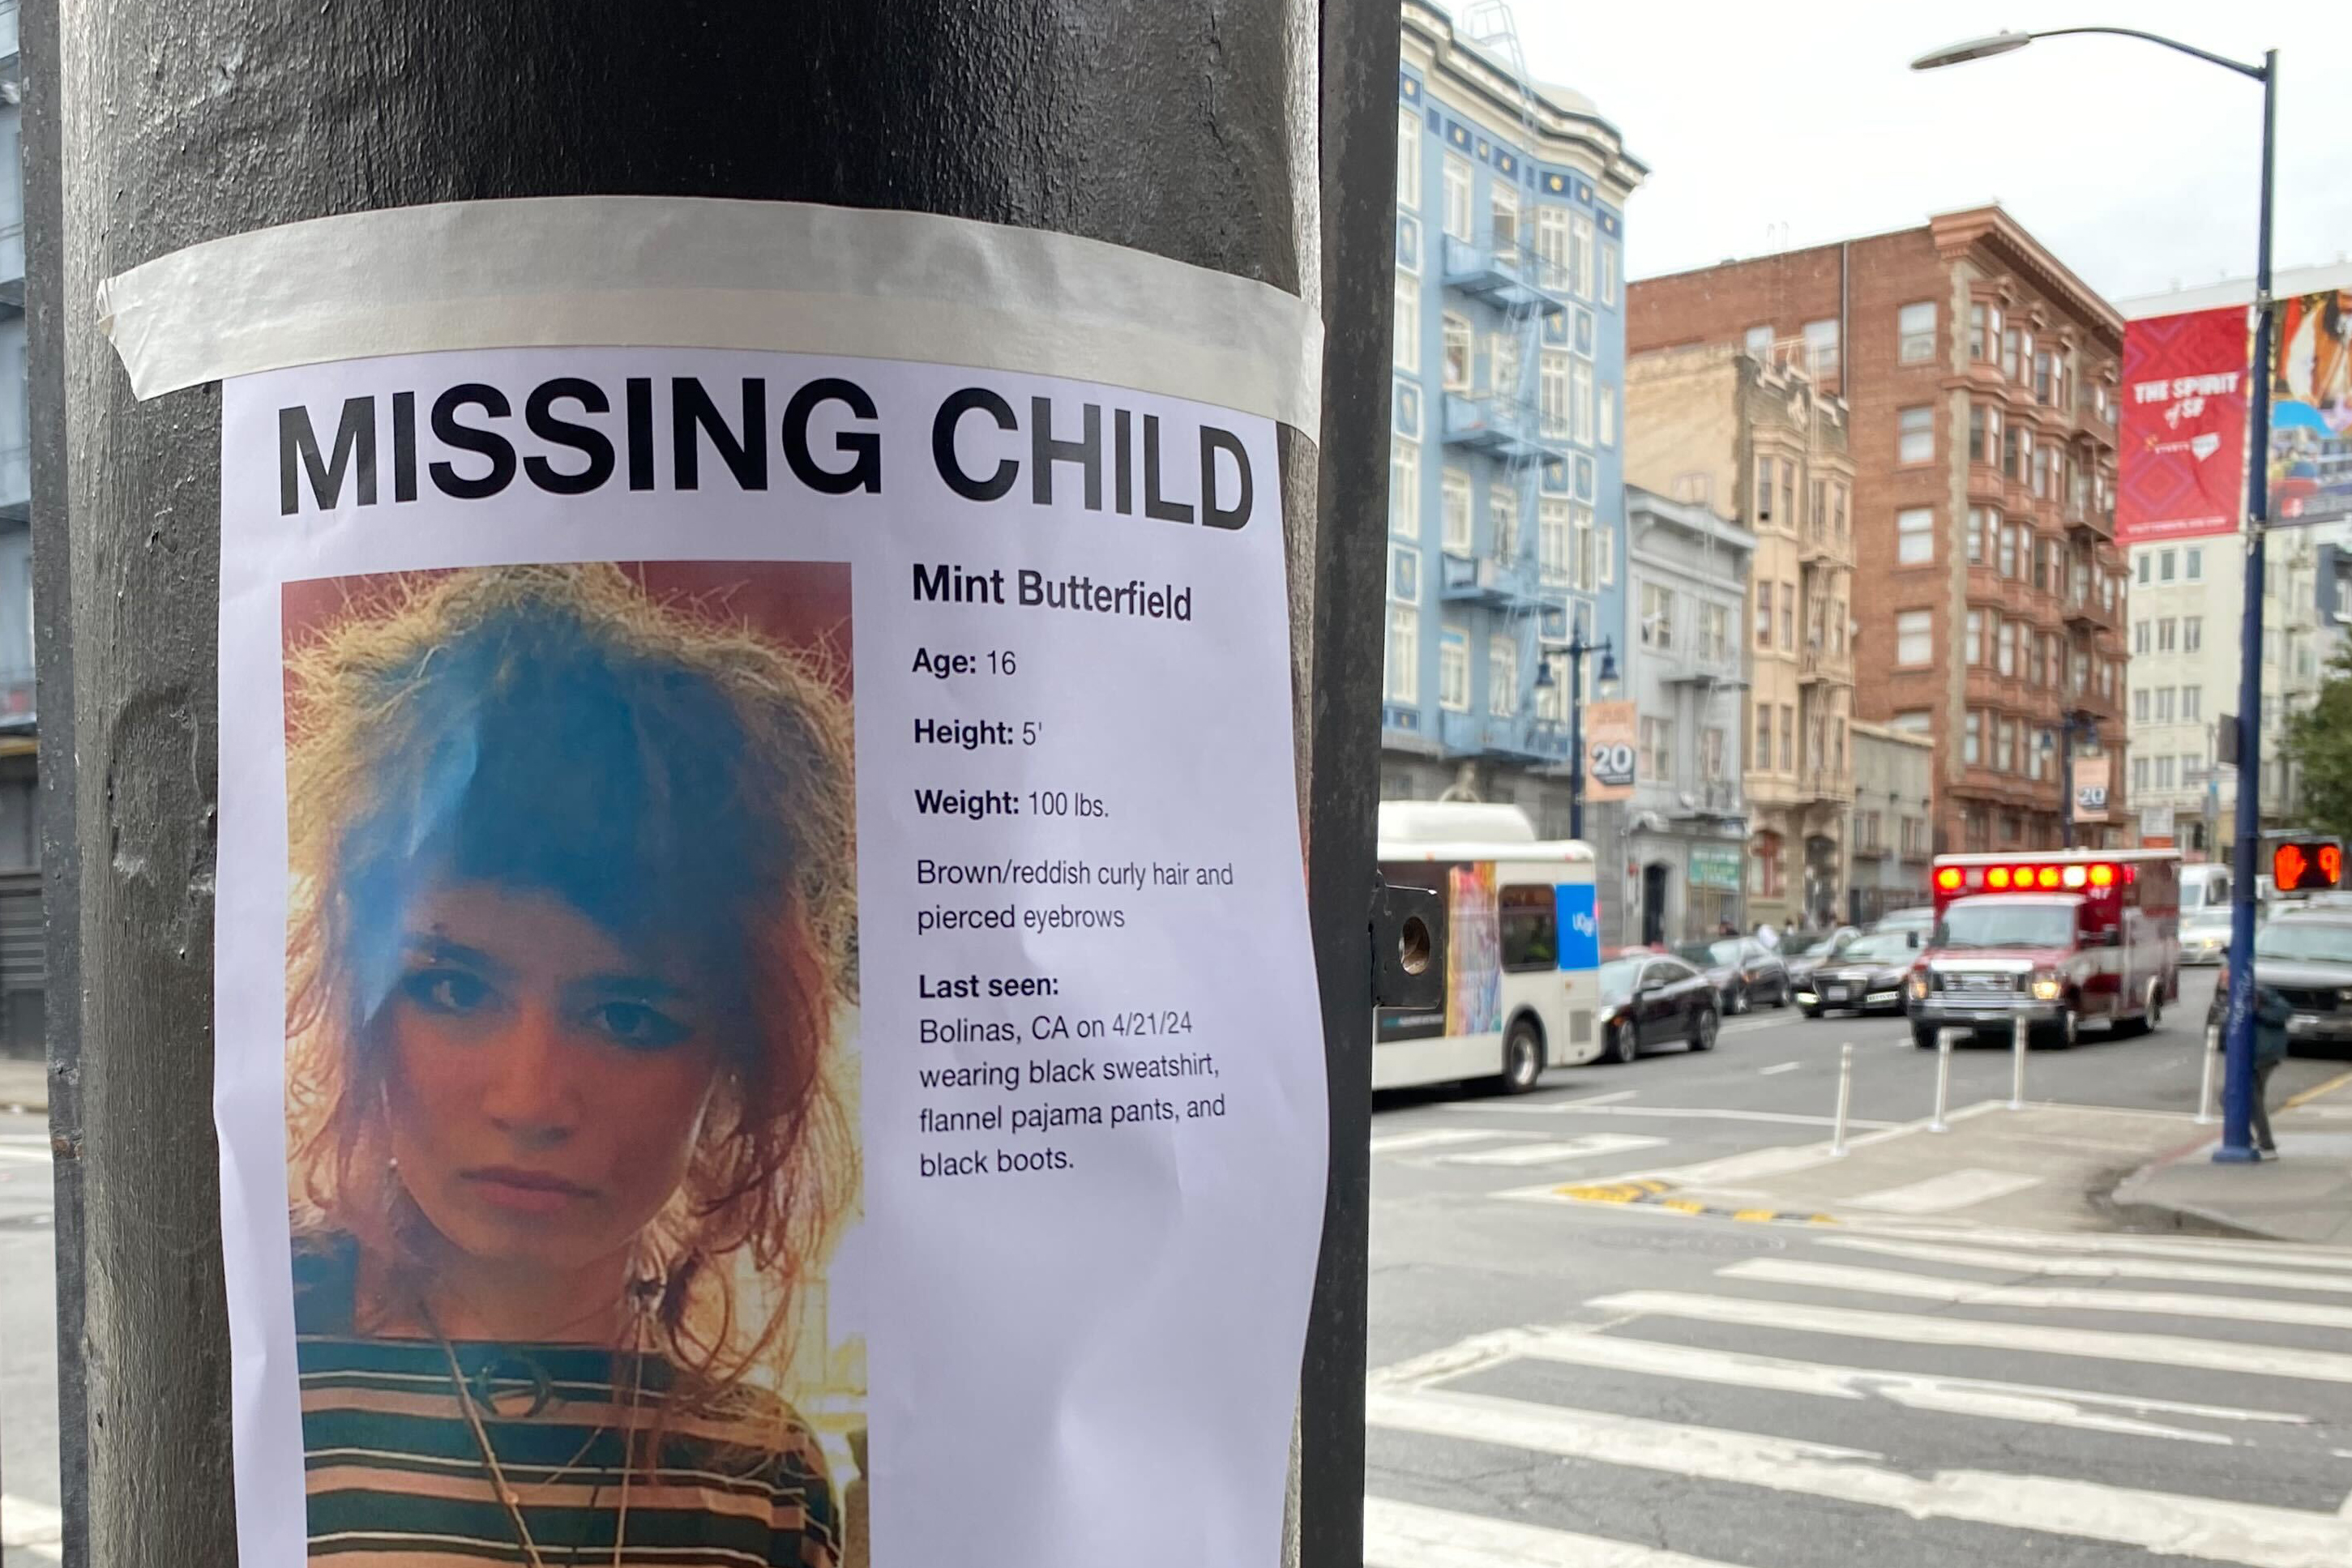 A 'MISSING CHILD' poster on a pole with a photo and details, against a blurred city street backdrop.